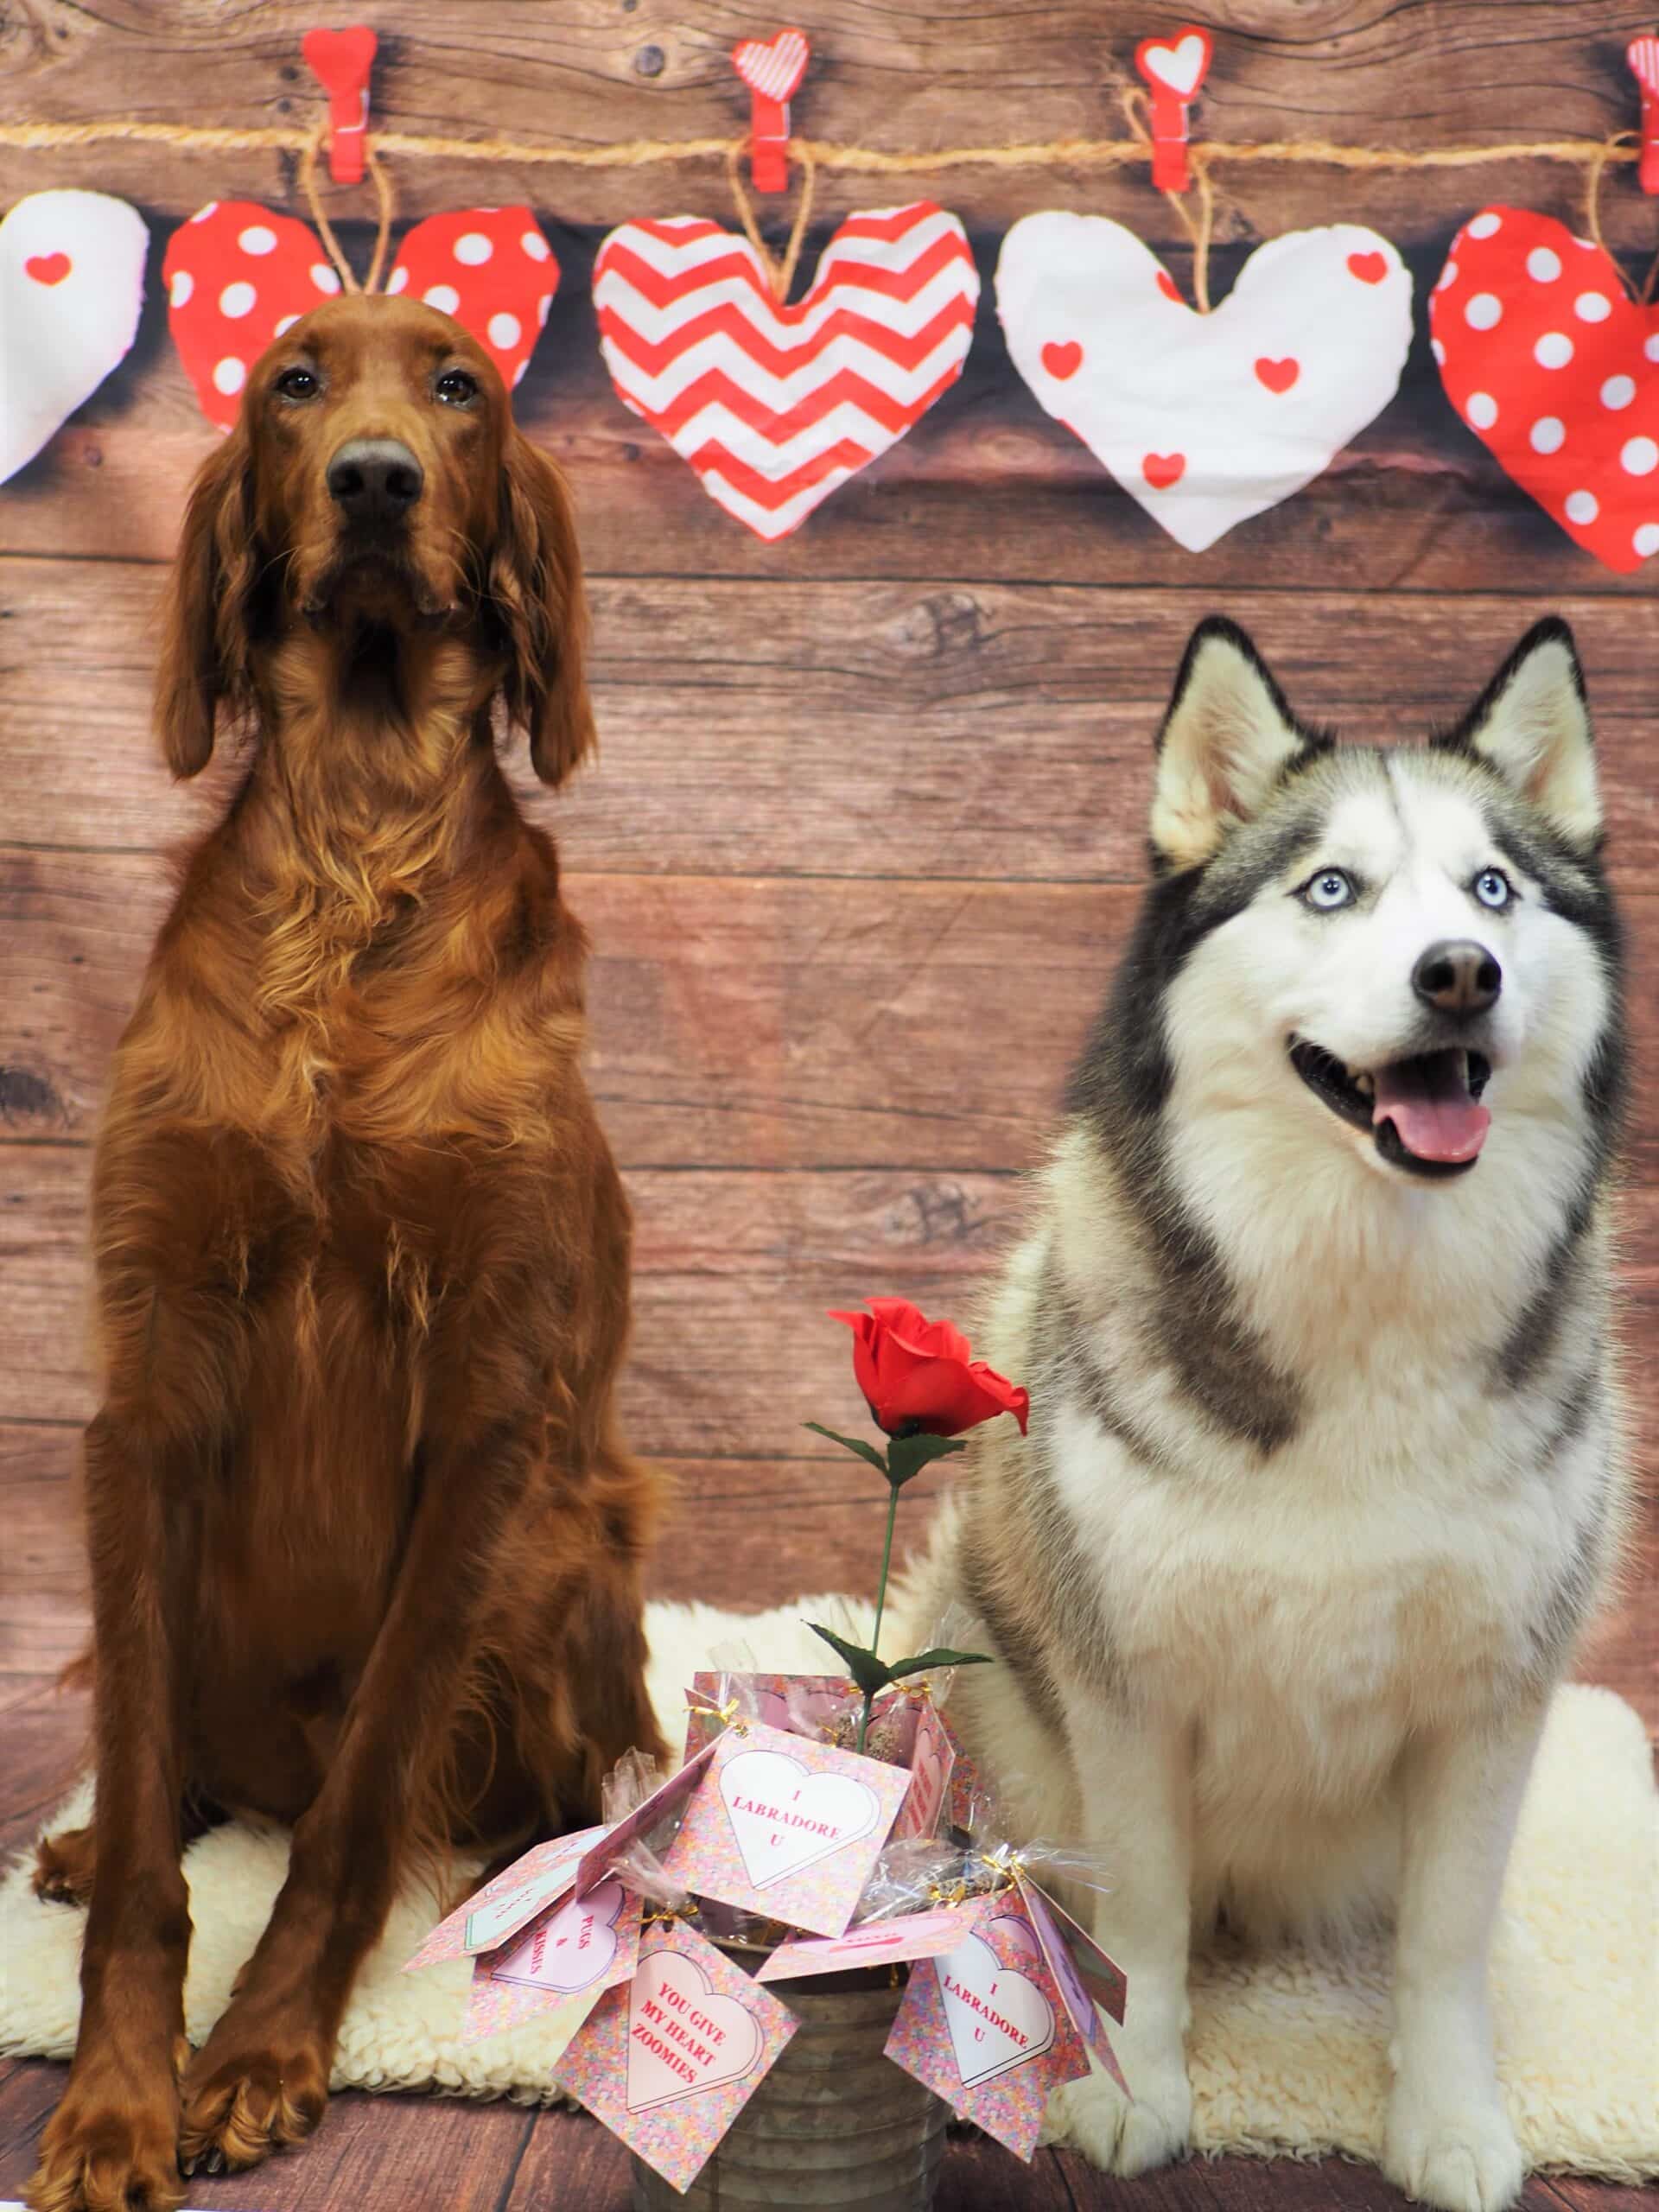 2 dogs posing together in front of a Valentine's backdrop